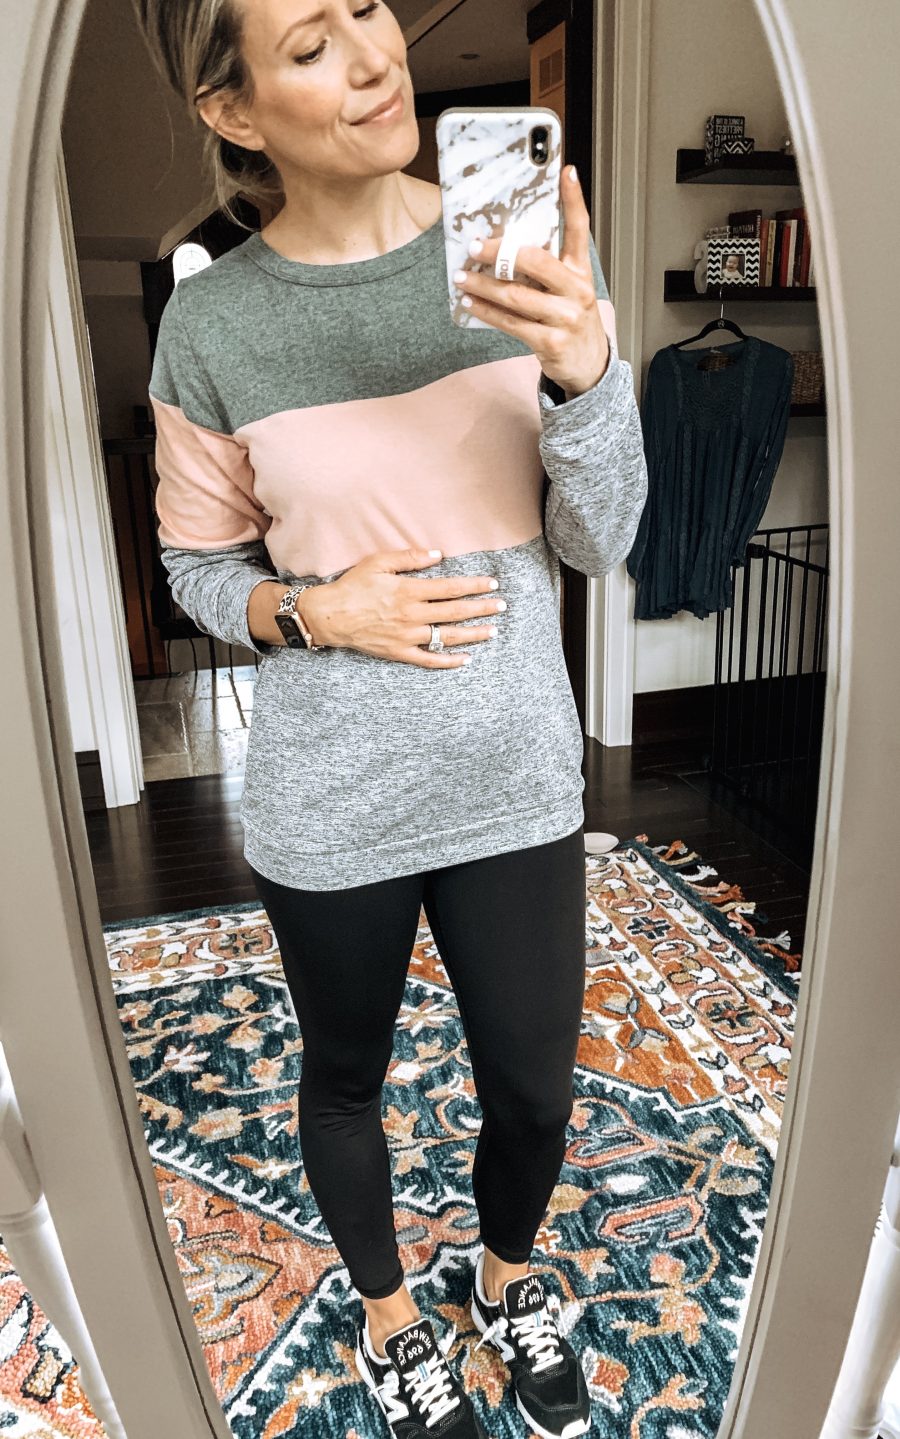 Ten cute and comfortable mom outfits for the girl on the go. These looks are perfect for chasing littles, balancing work, or running around 